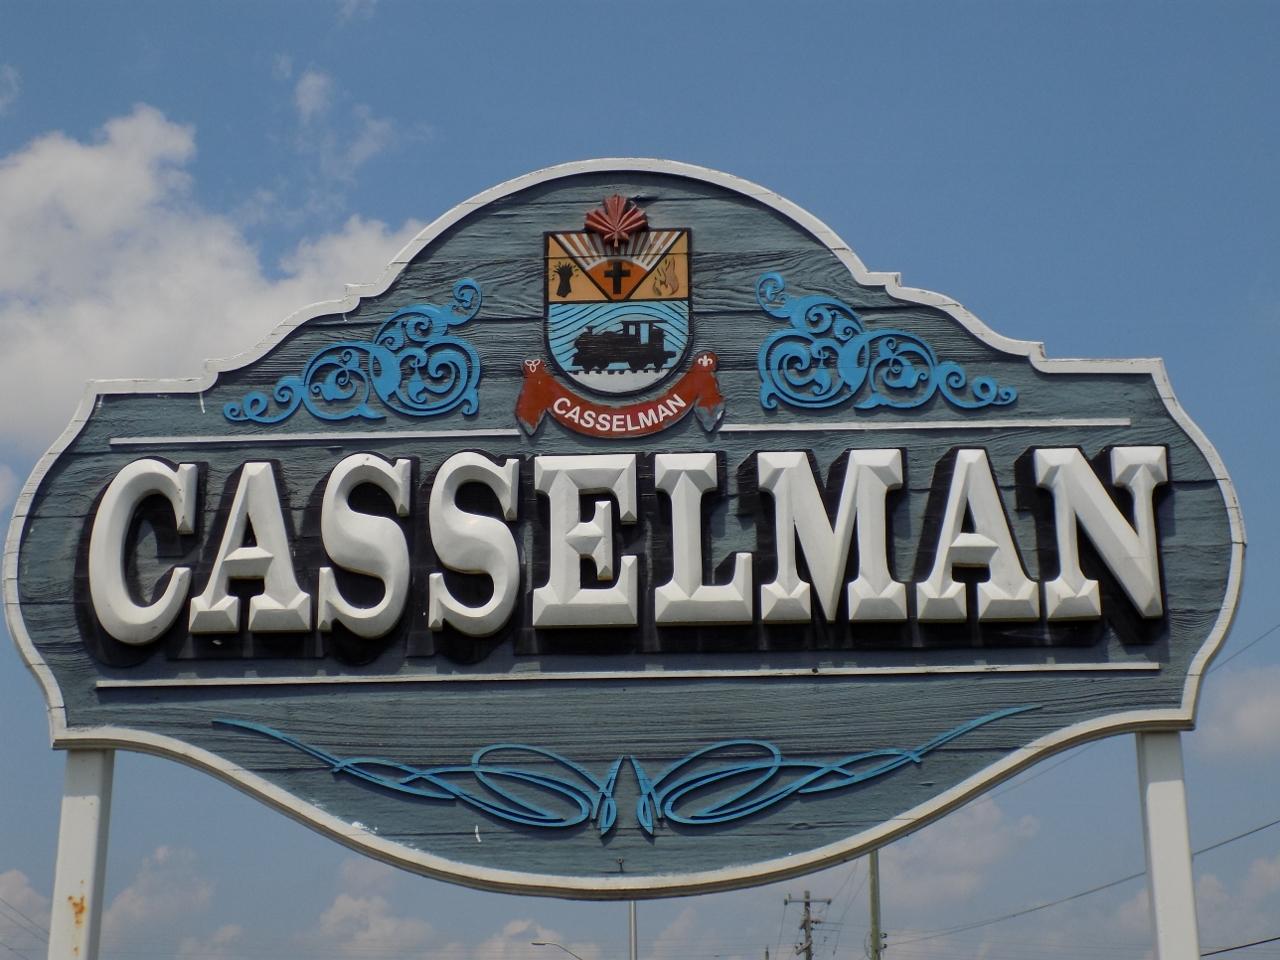 Casselman putting a ban on plastic bags and drinking straws